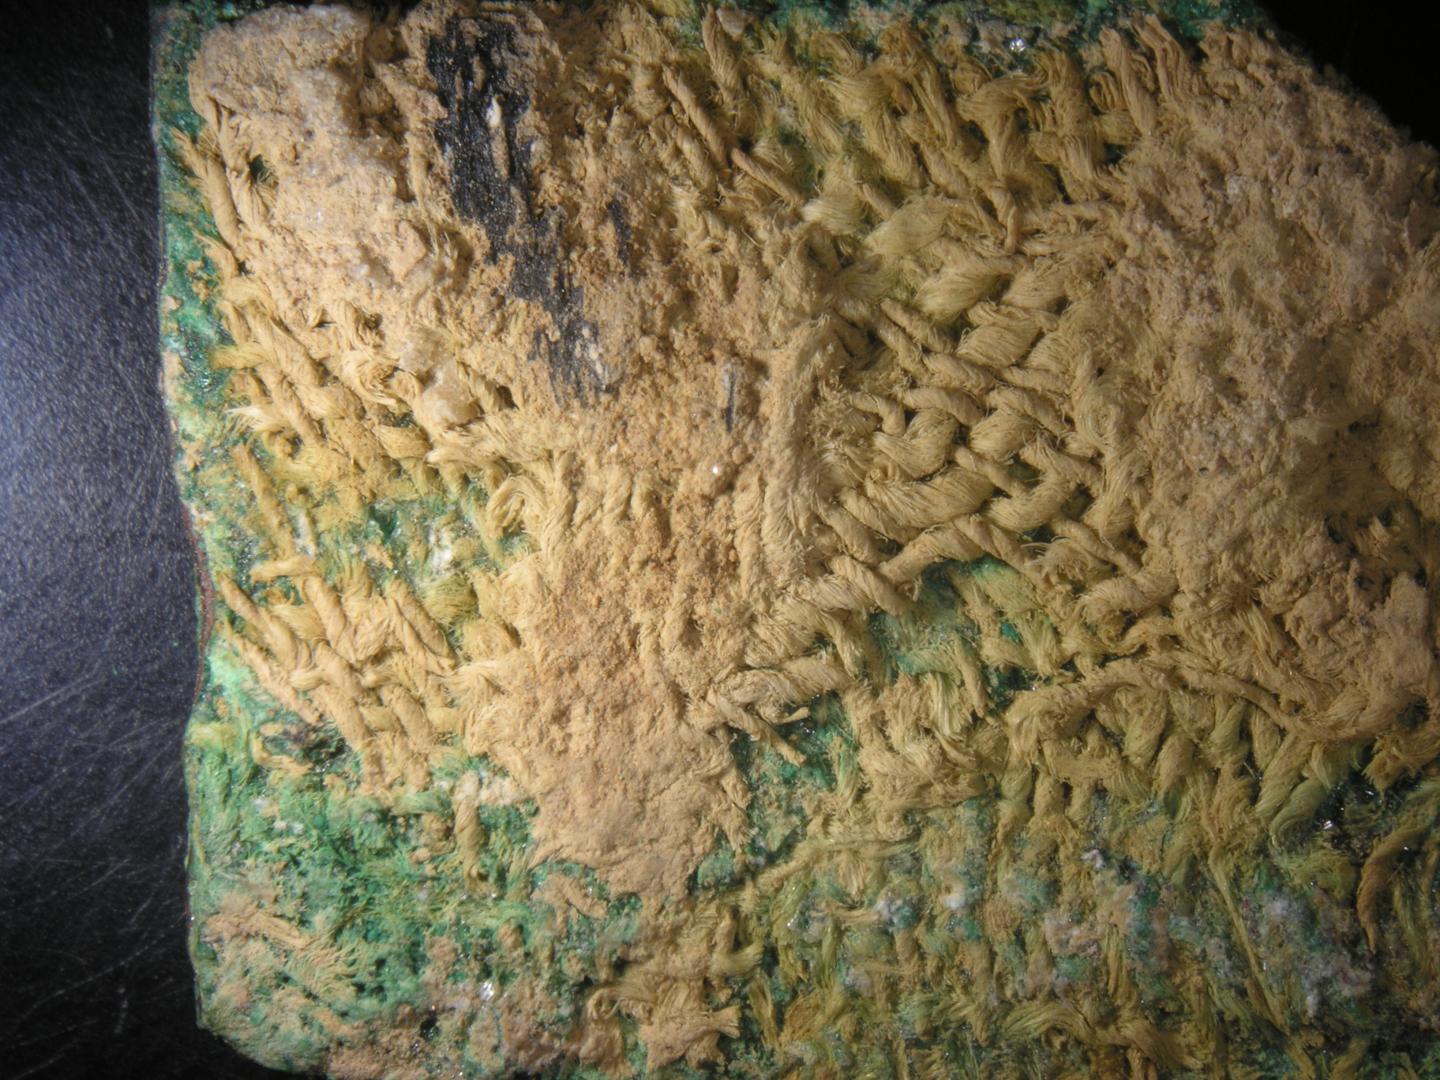 Mineralized textile fragment on the surface of a thin copper-based plate from the Nausharo site